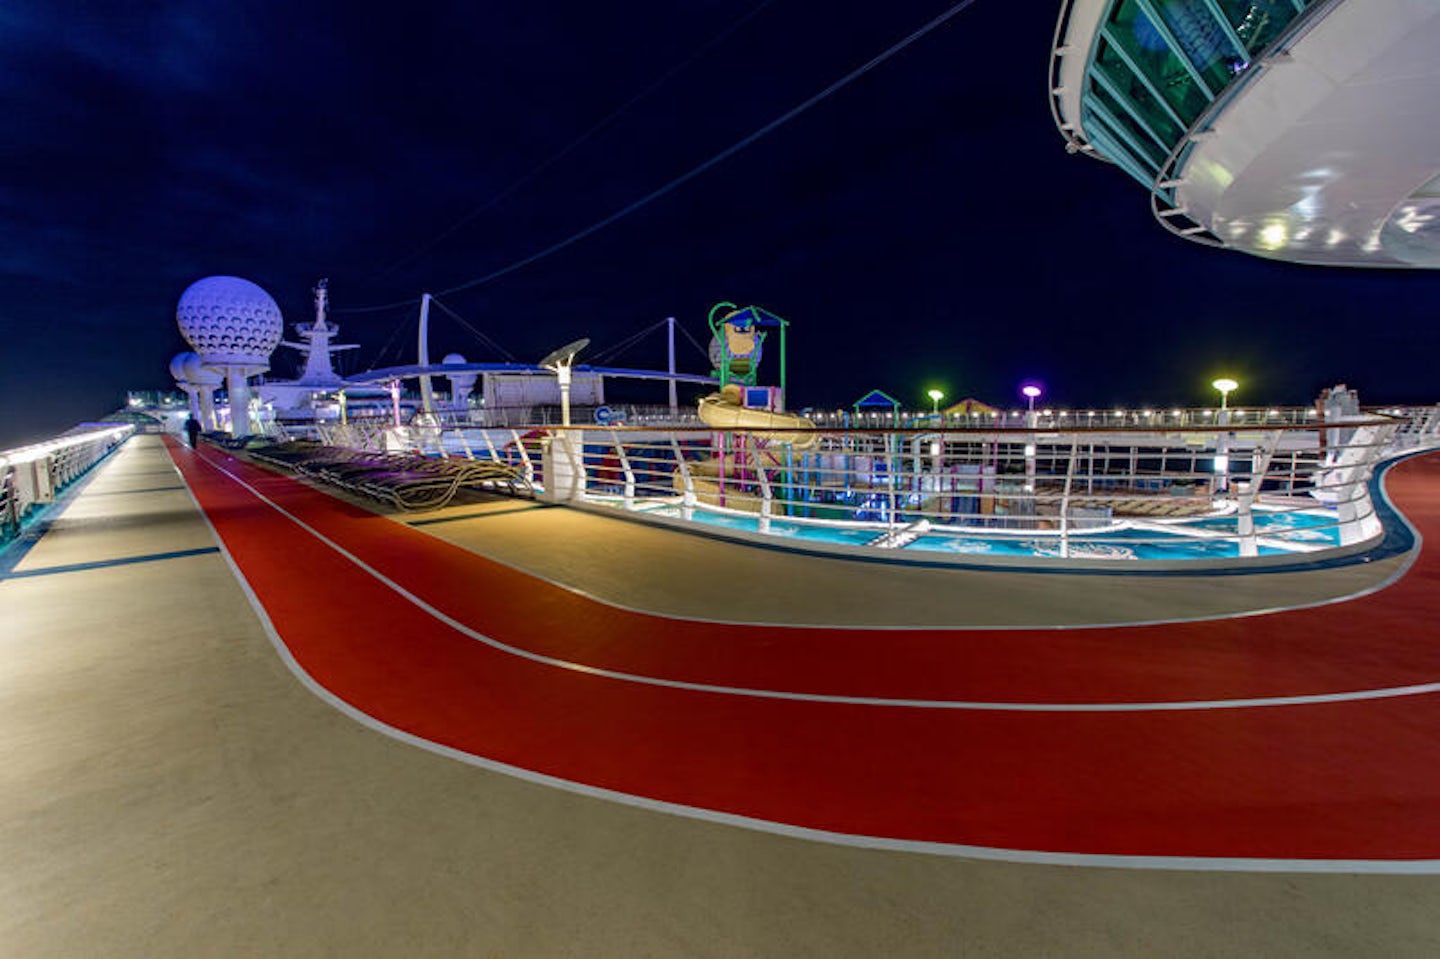 Jogging Track on Independence of the Seas